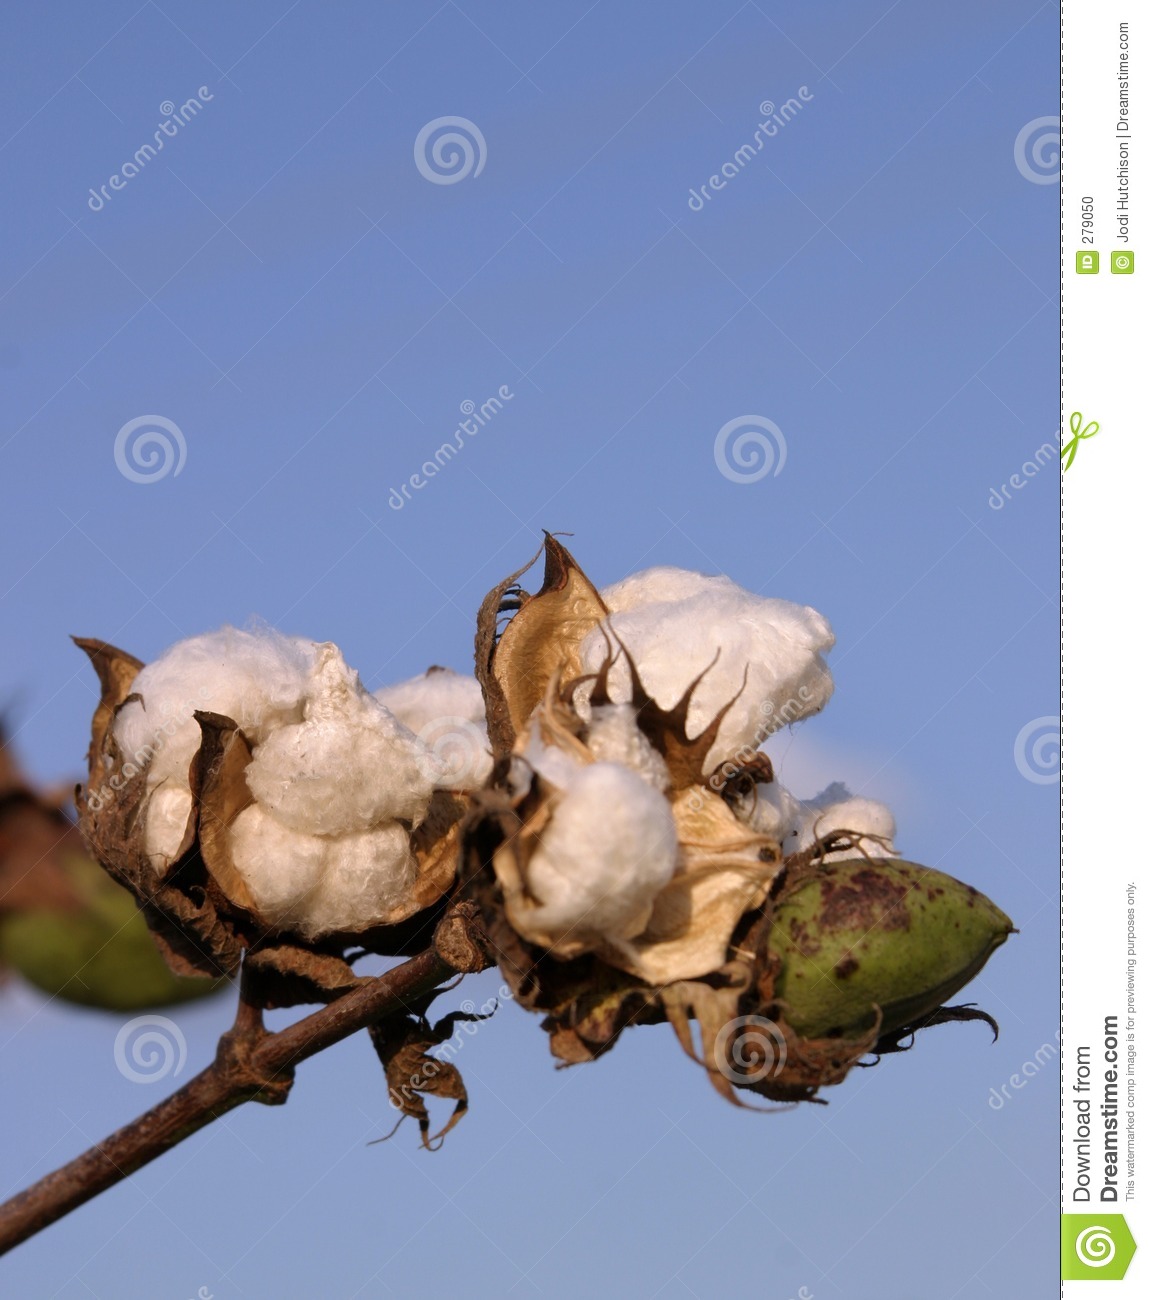 Cotton Stalk With A Cluster Open And Unopen Bolls Creating Cotton